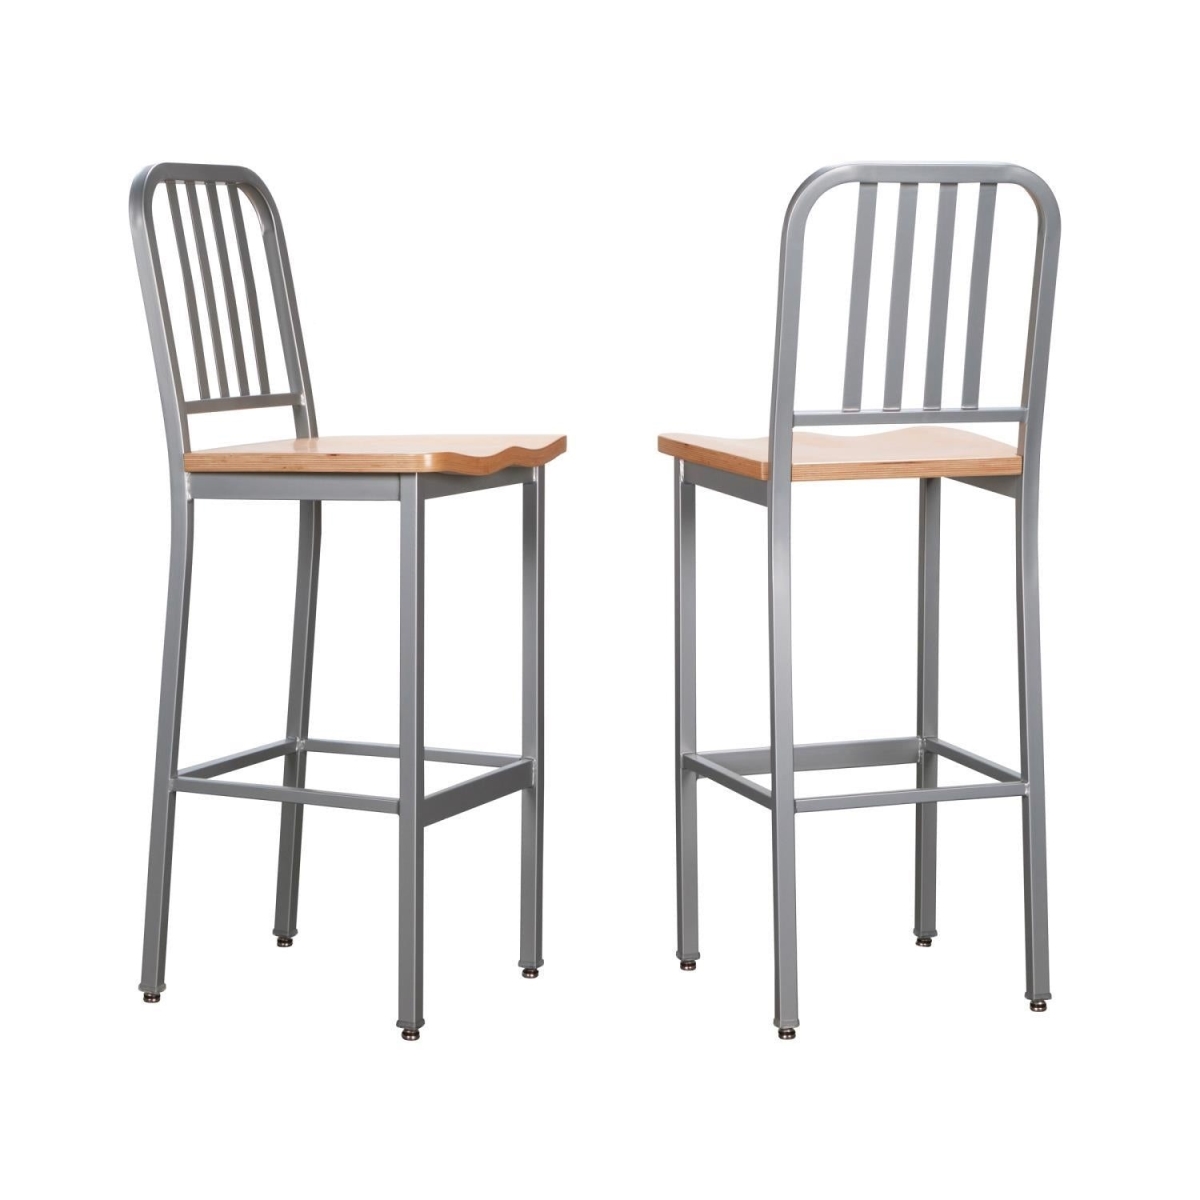 Picture of Linon Home Decor BS257SIL02 45 x 17.5 x 16.5 in. Frazier Metal Barstool, Silver - Set of 2